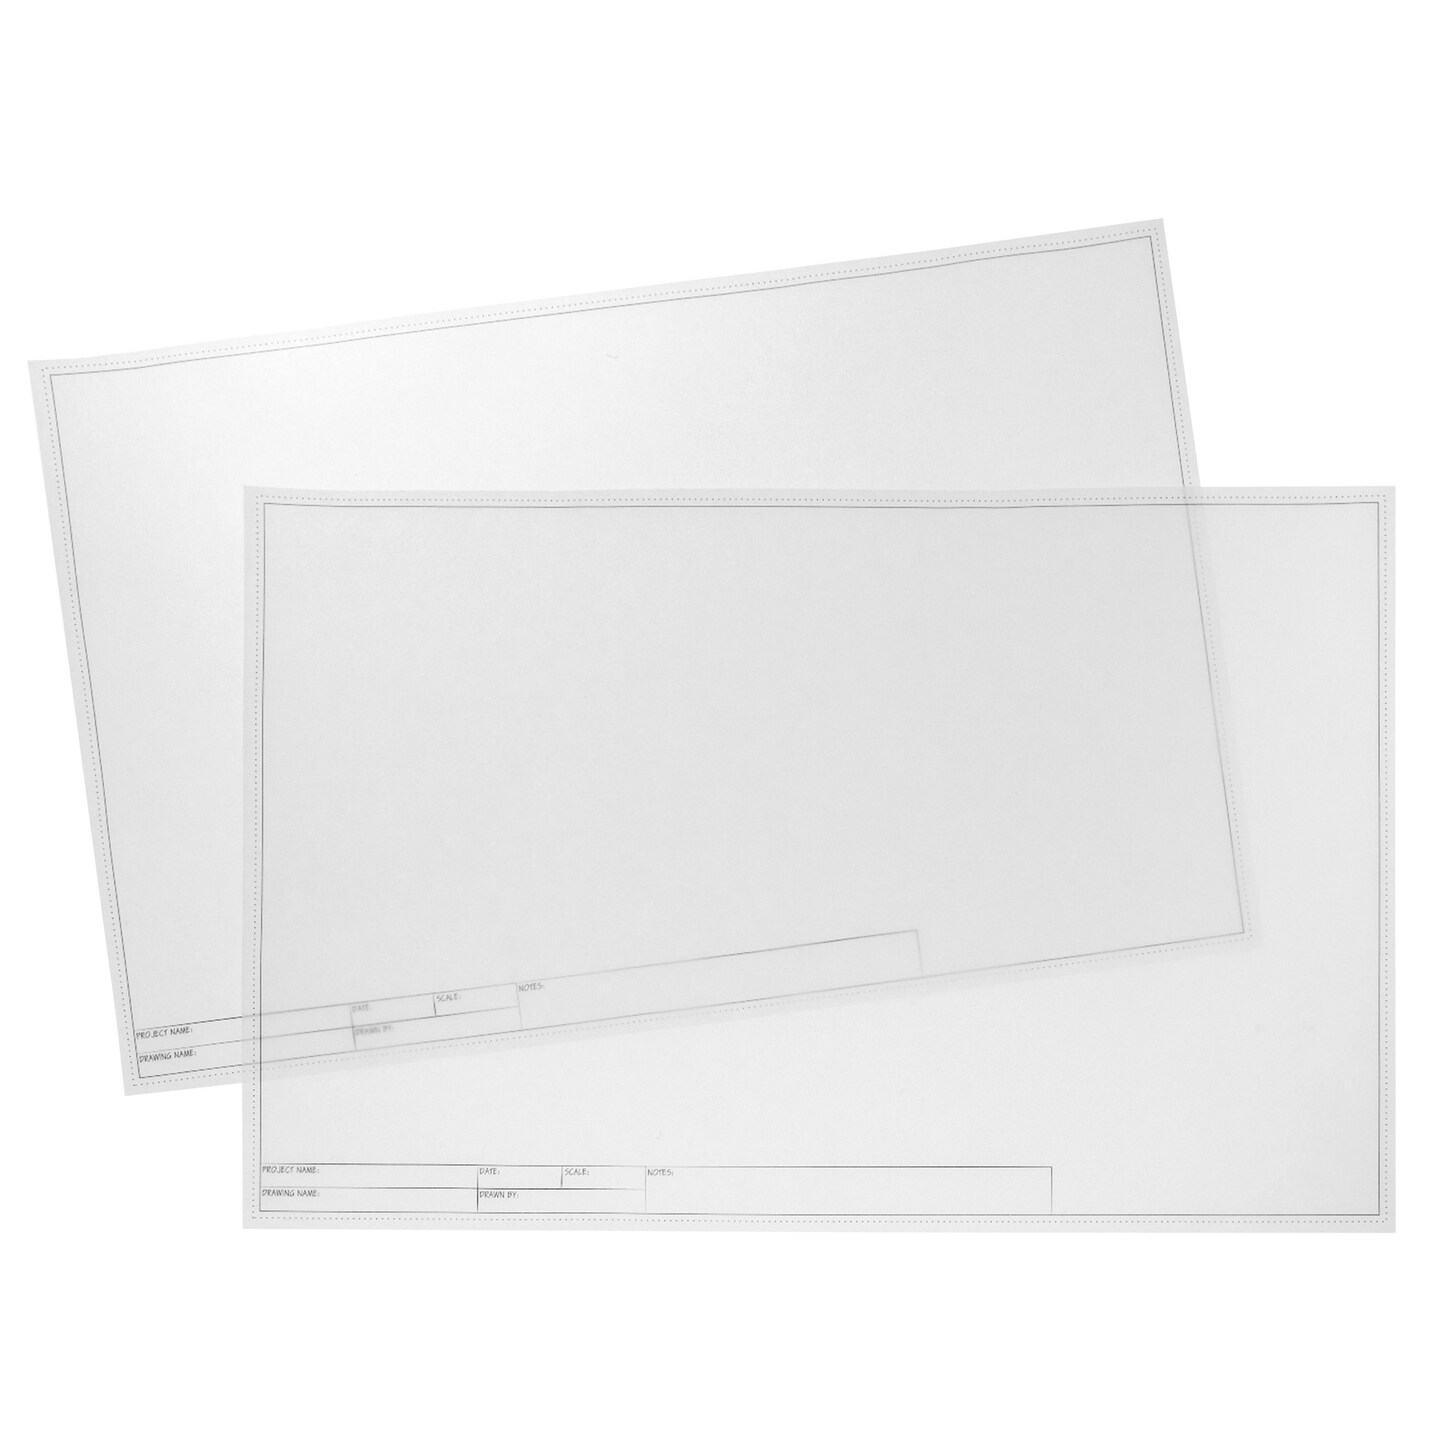 Translucent Architectural Vellum Paper, Drafting Sheets 11x17 with